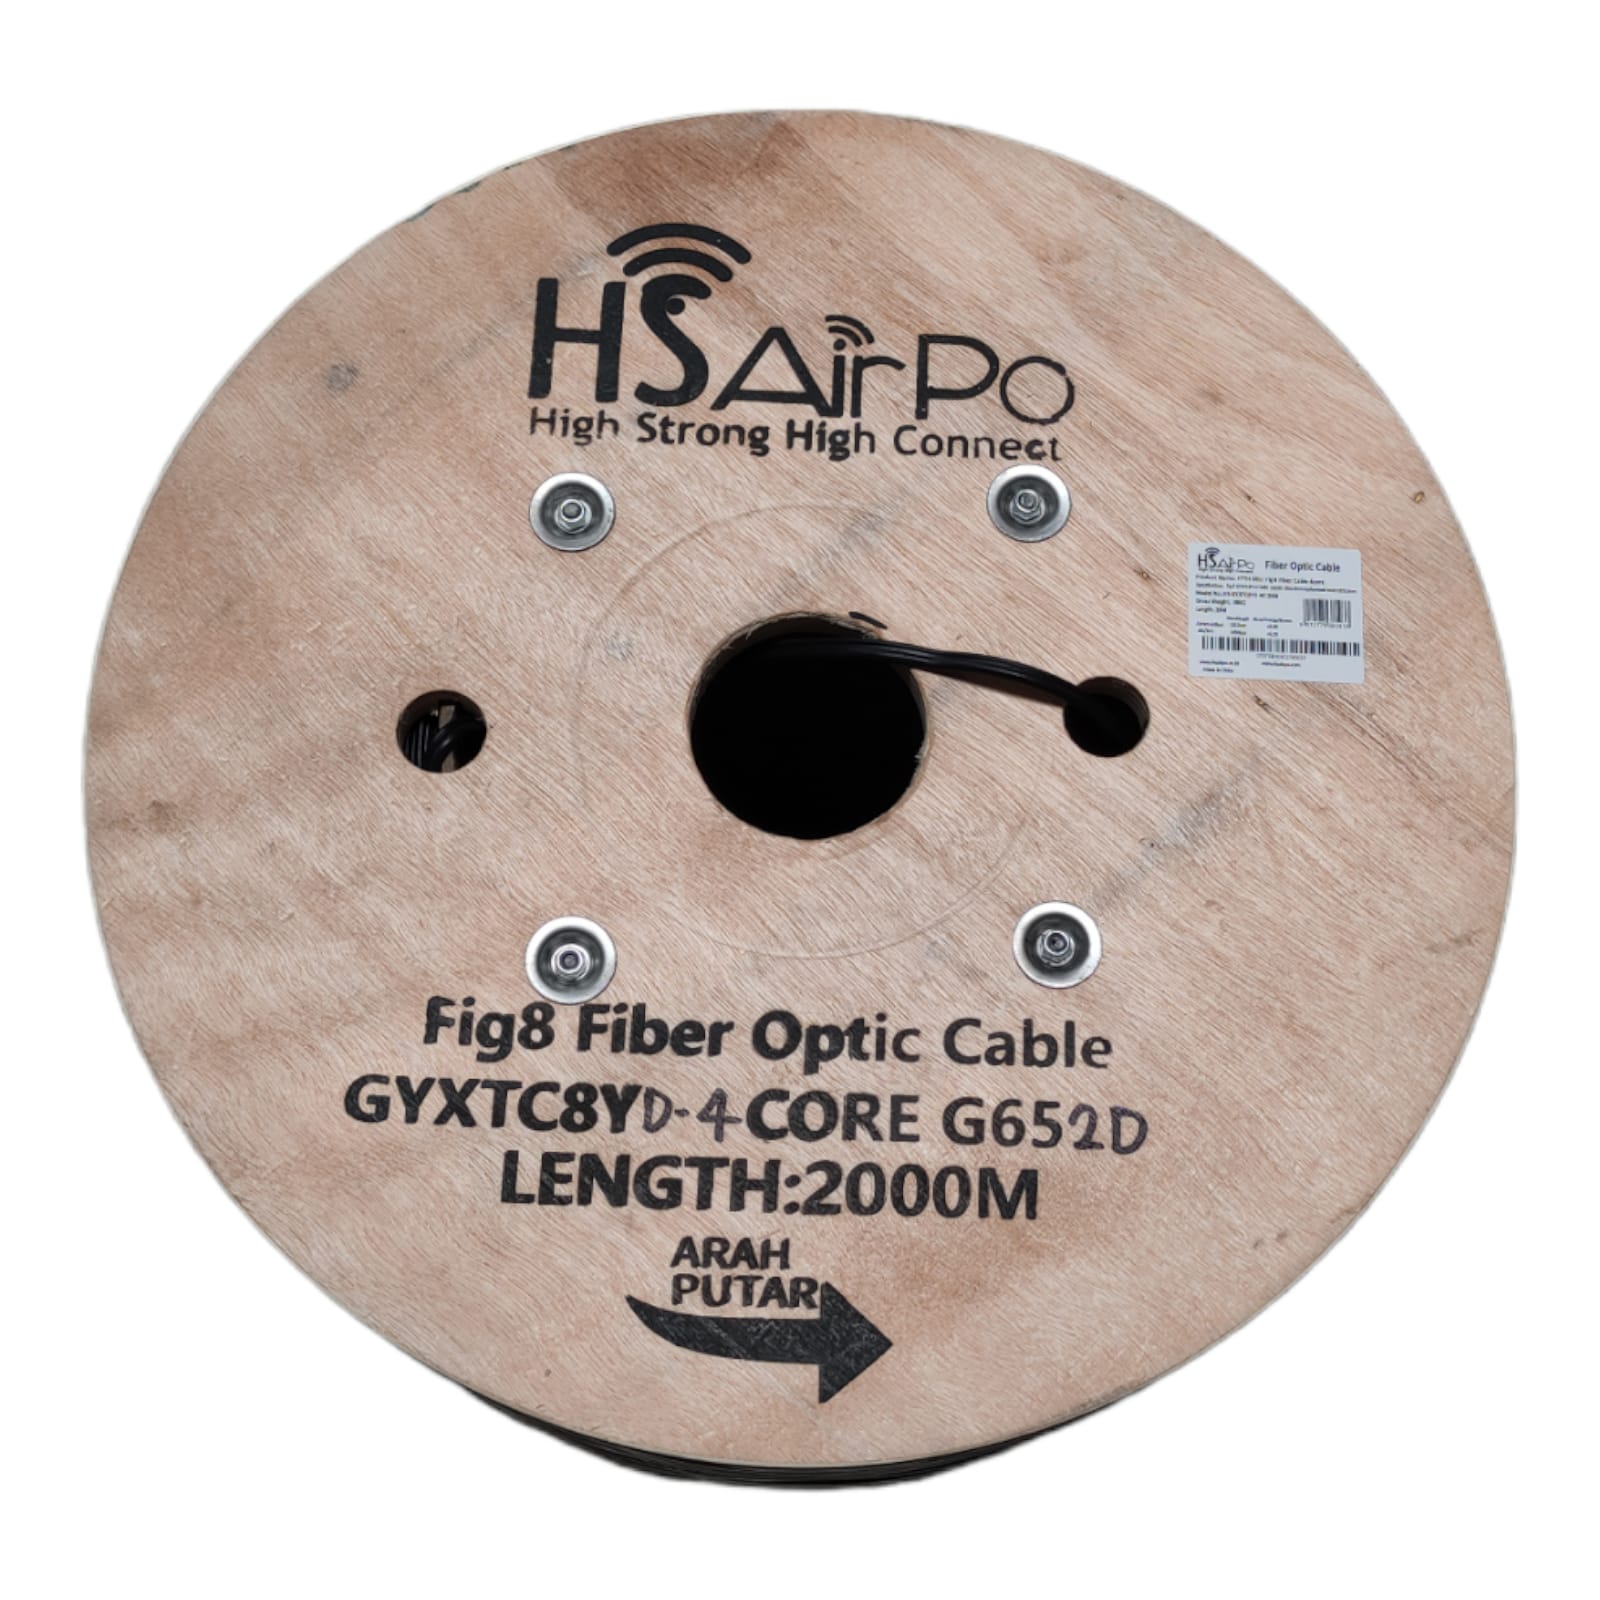 HSAIRPO DROPCABLE G652D FIG8 4CORE 2KM GYXTC8YD 4C